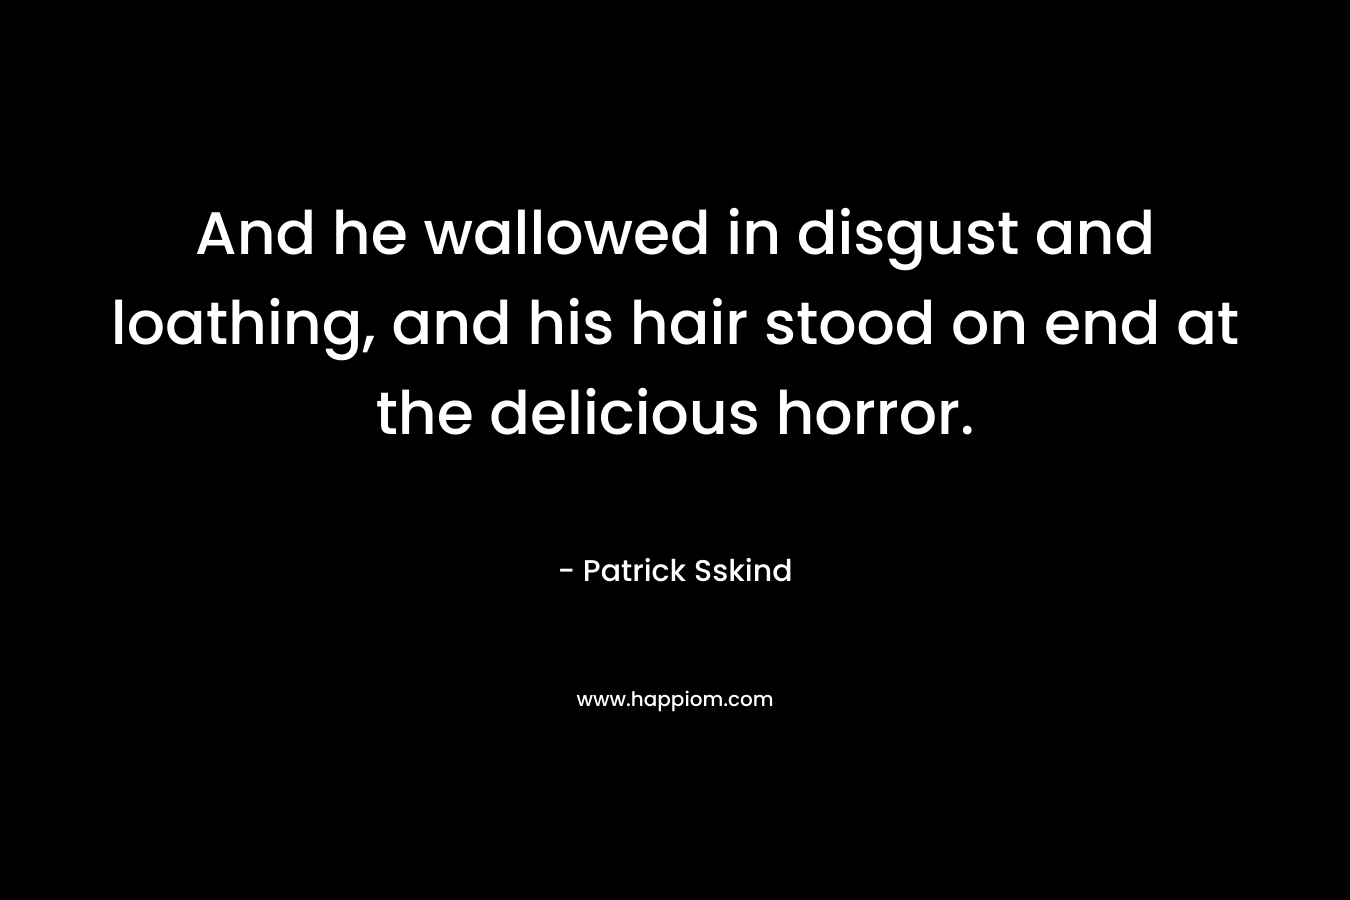 And he wallowed in disgust and loathing, and his hair stood on end at the delicious horror. – Patrick Sskind